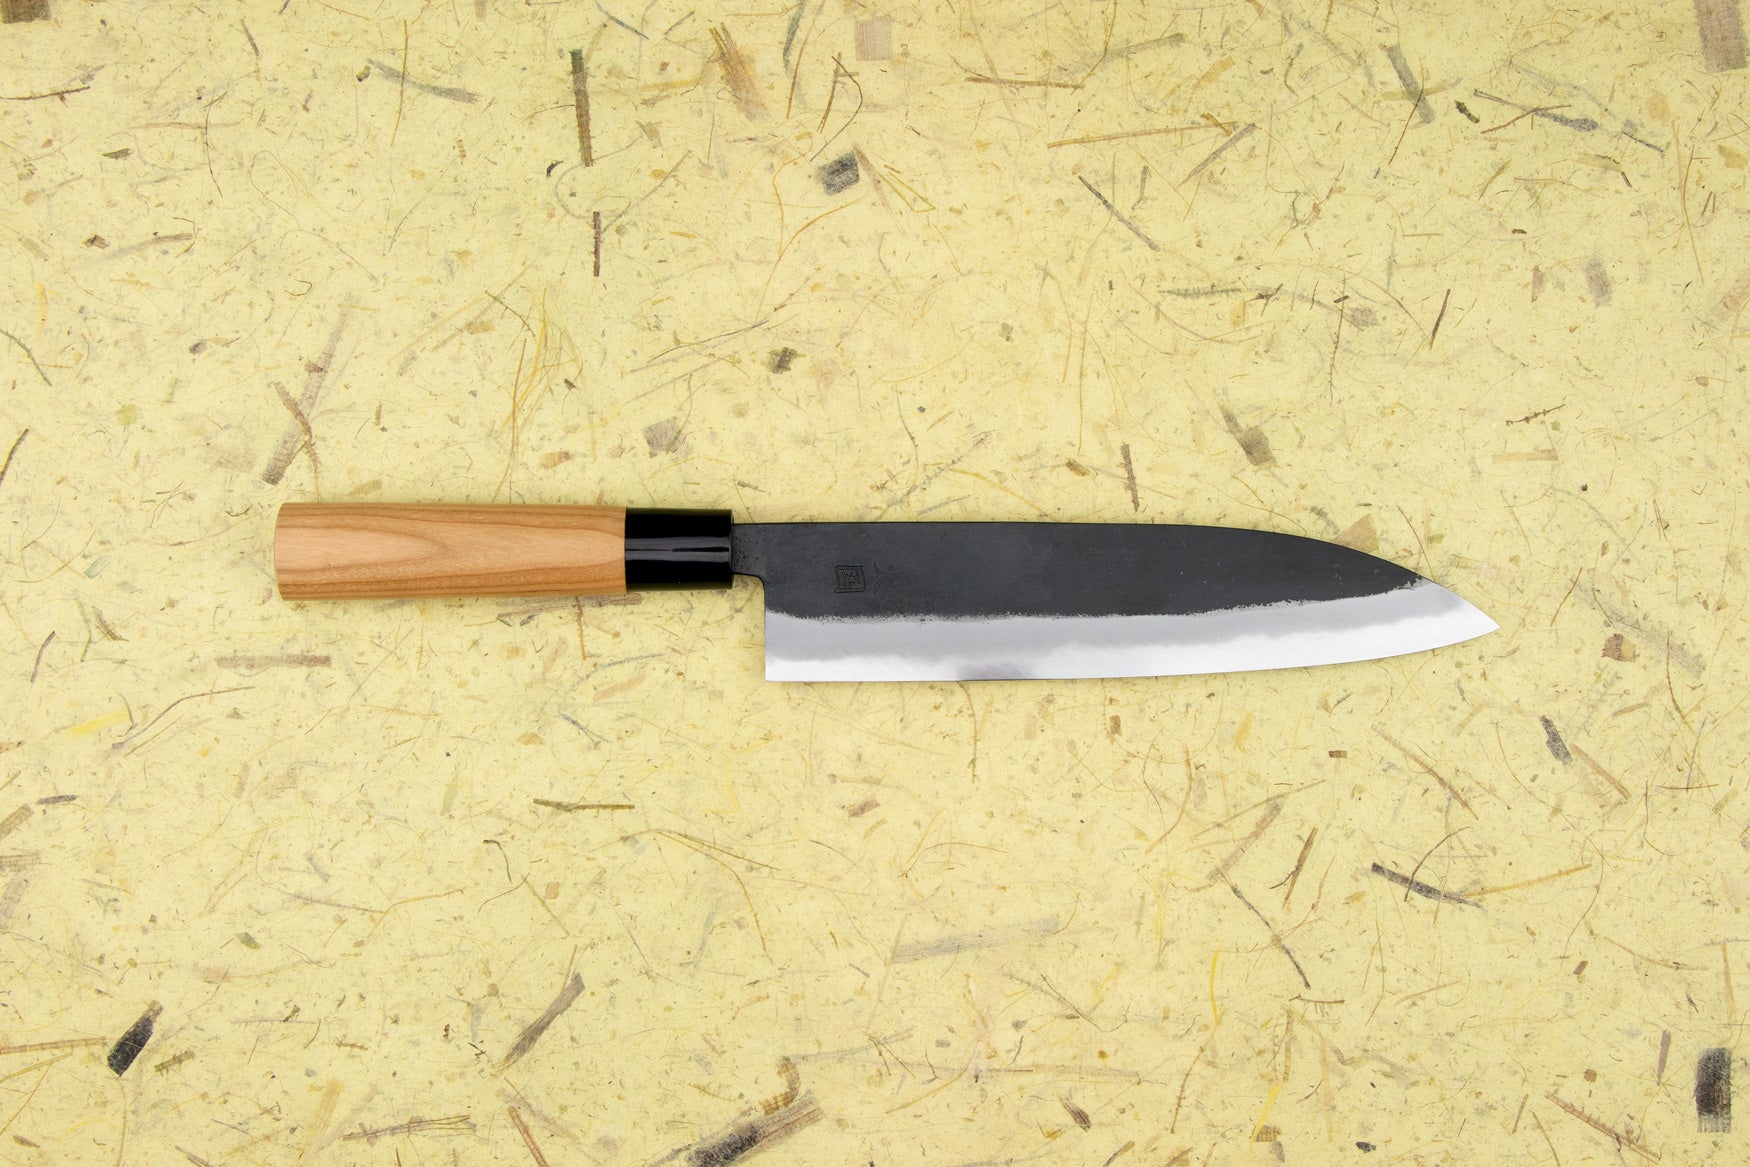 The Best Japanese Chef Knife with Pakka Wooden Handle Under 100 USD